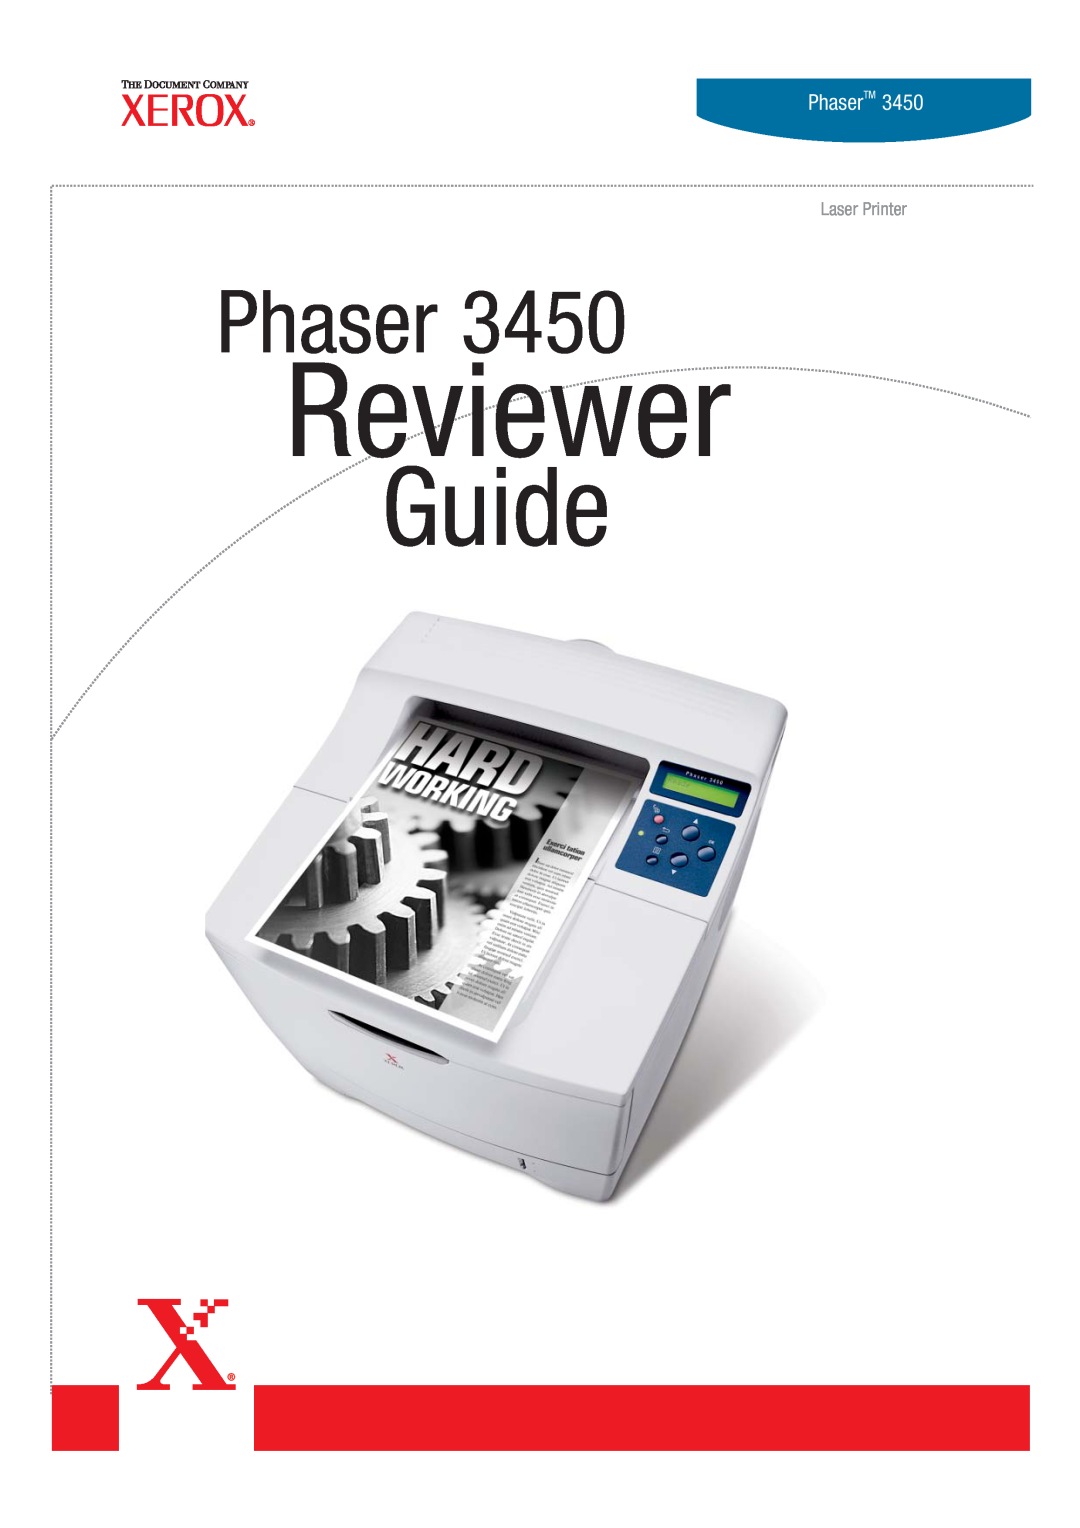 Xerox 4500/N manual Award-Winning, Black-and-White, Editors’ Choice, A-Rating, Pick of the Year, Certificate of, Phaser 